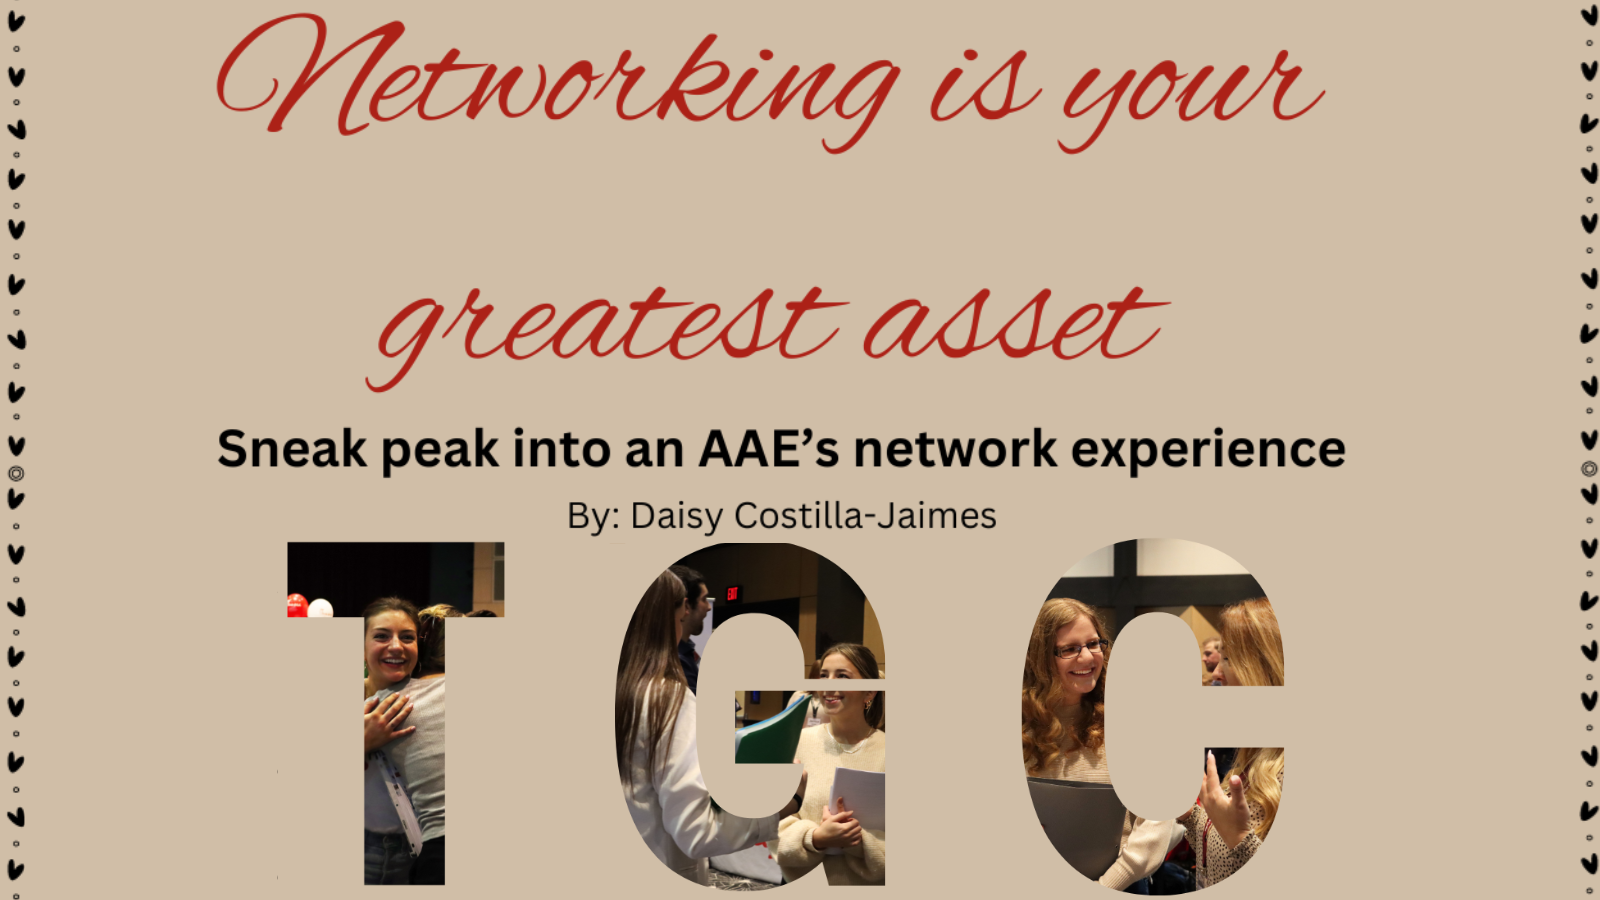 Networking is your greatest asset